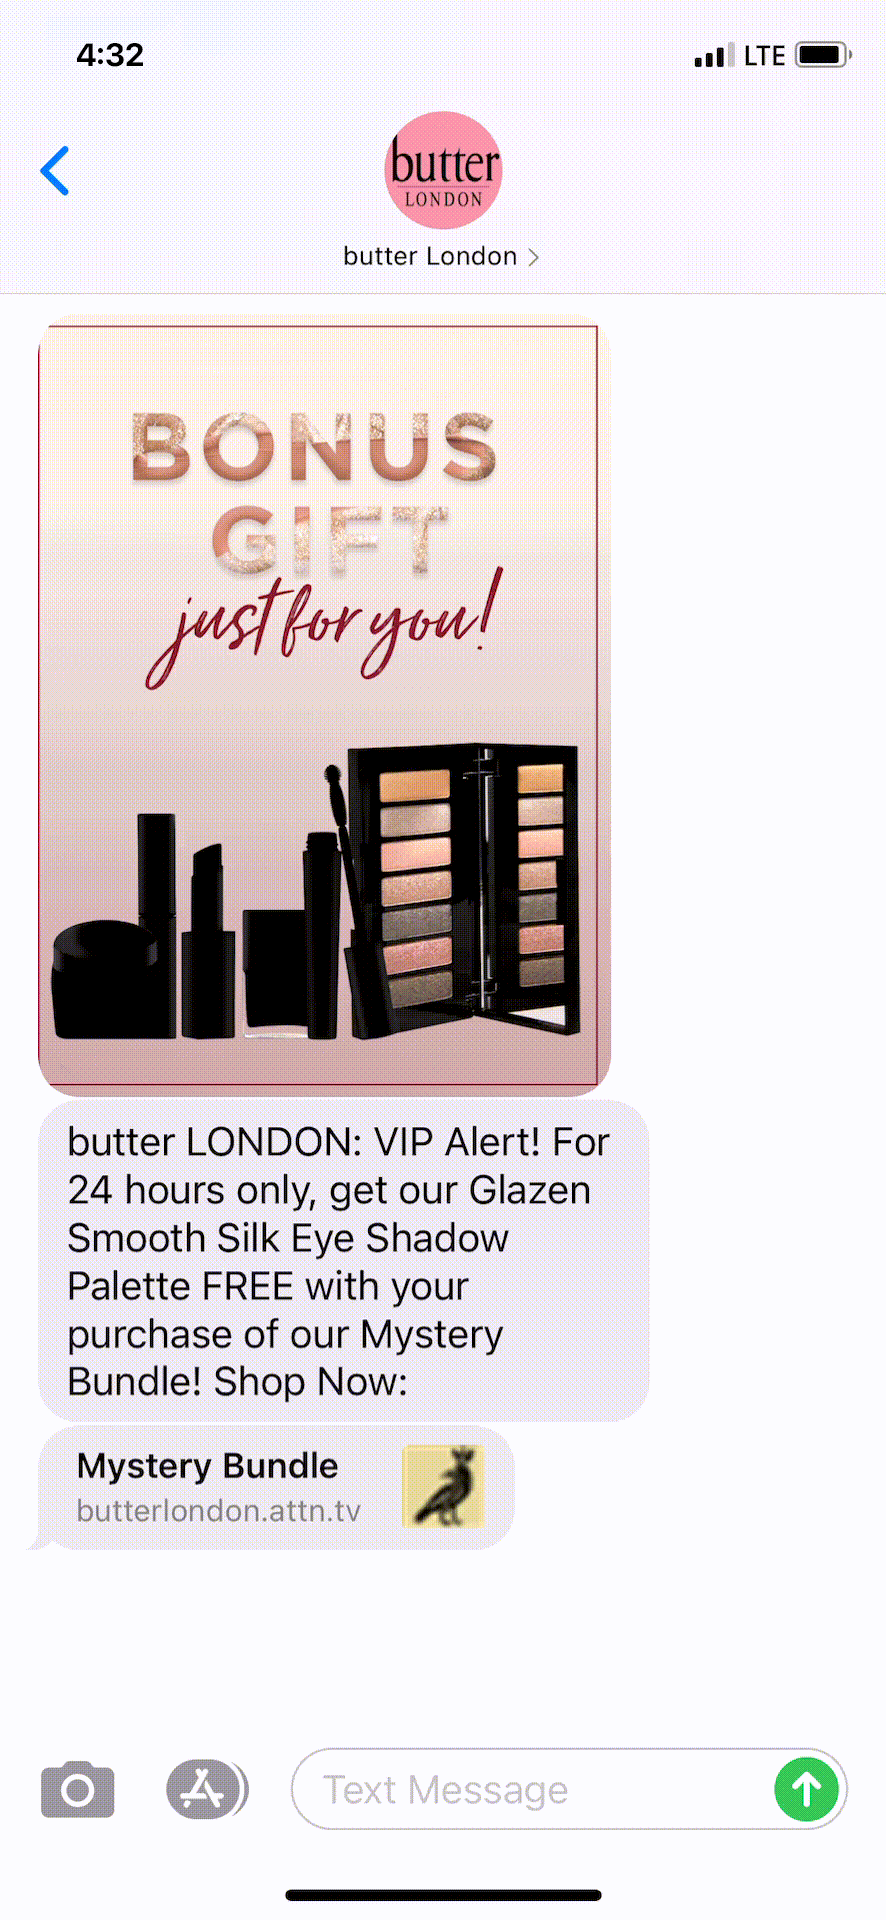 butter-London-Text-Message-Marketing-Example-02.24.2021